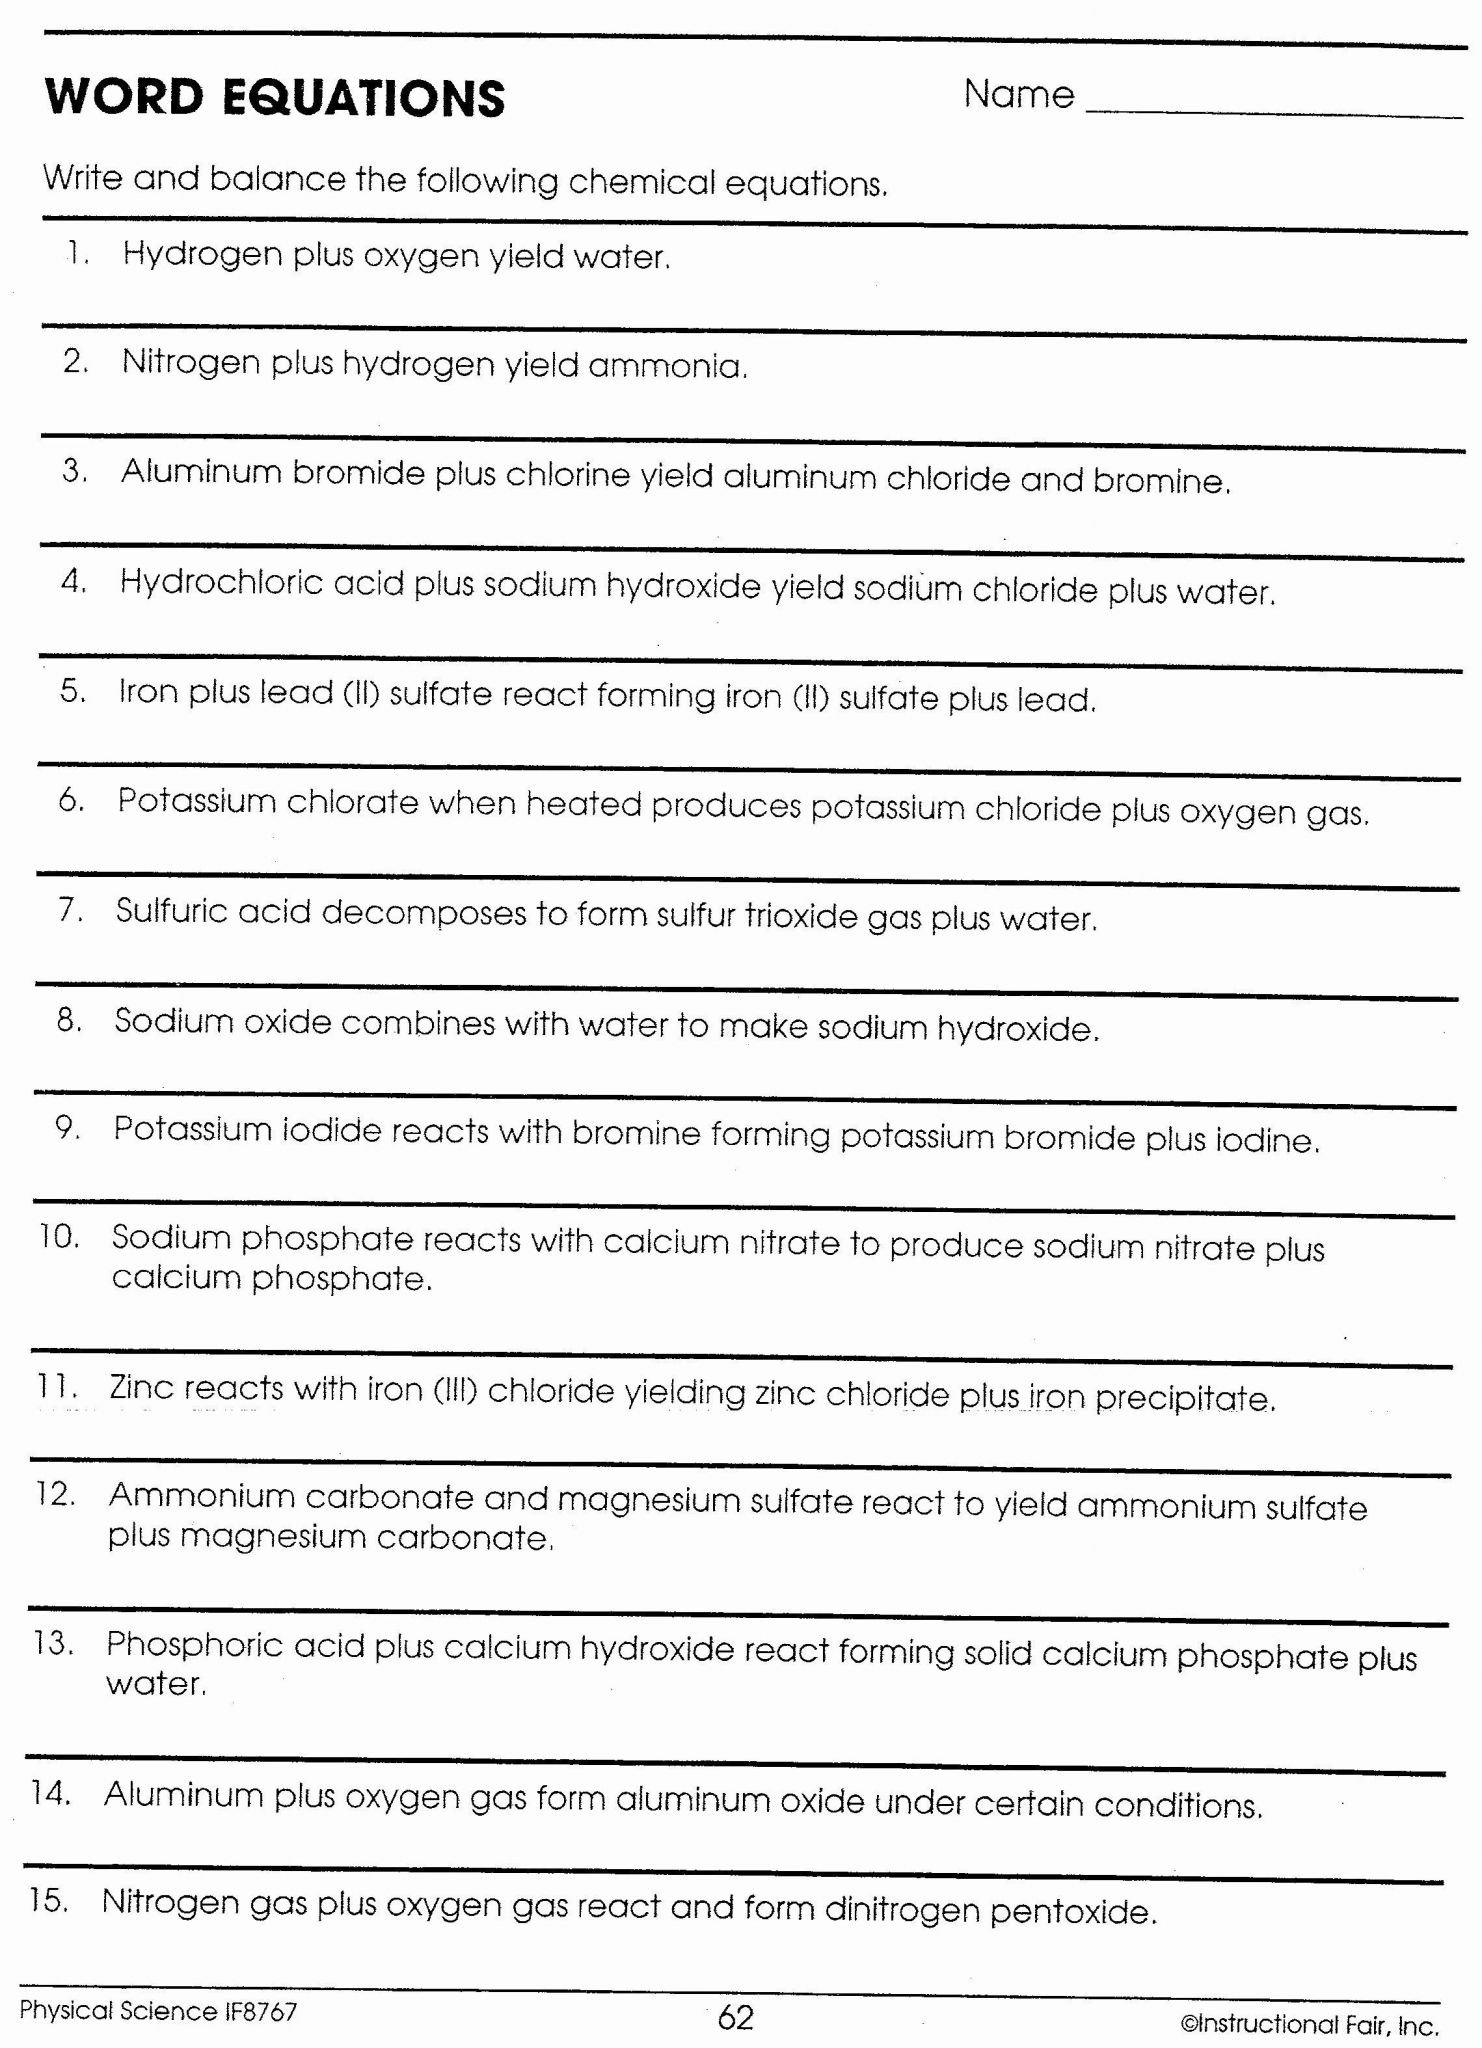 Balancing Chemical Equations Worksheet  Briefencounters Throughout Word Equations Chemistry Worksheet